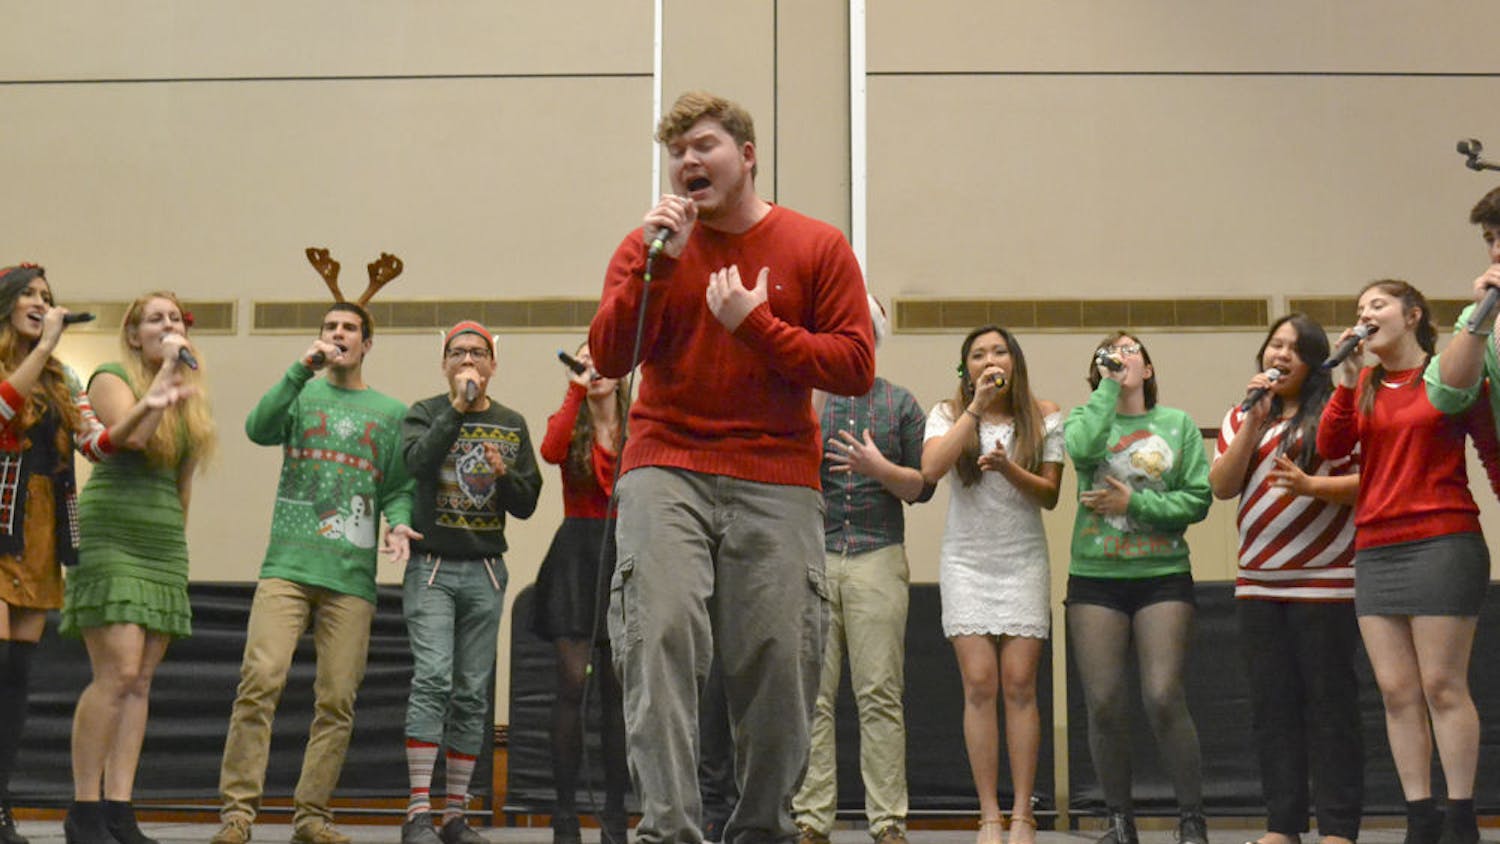 John Nyren, a 22-year-old UF computer science senior, belts out “Lay Me Down” by Sam Smith with the UF a capella group Tone Deaf at the annual “Falala Cappella” concert in the Reitz Grand Ballroom on Dec. 7, 2015. Nyren has been with the group one semester and already says he “loves them like family.”